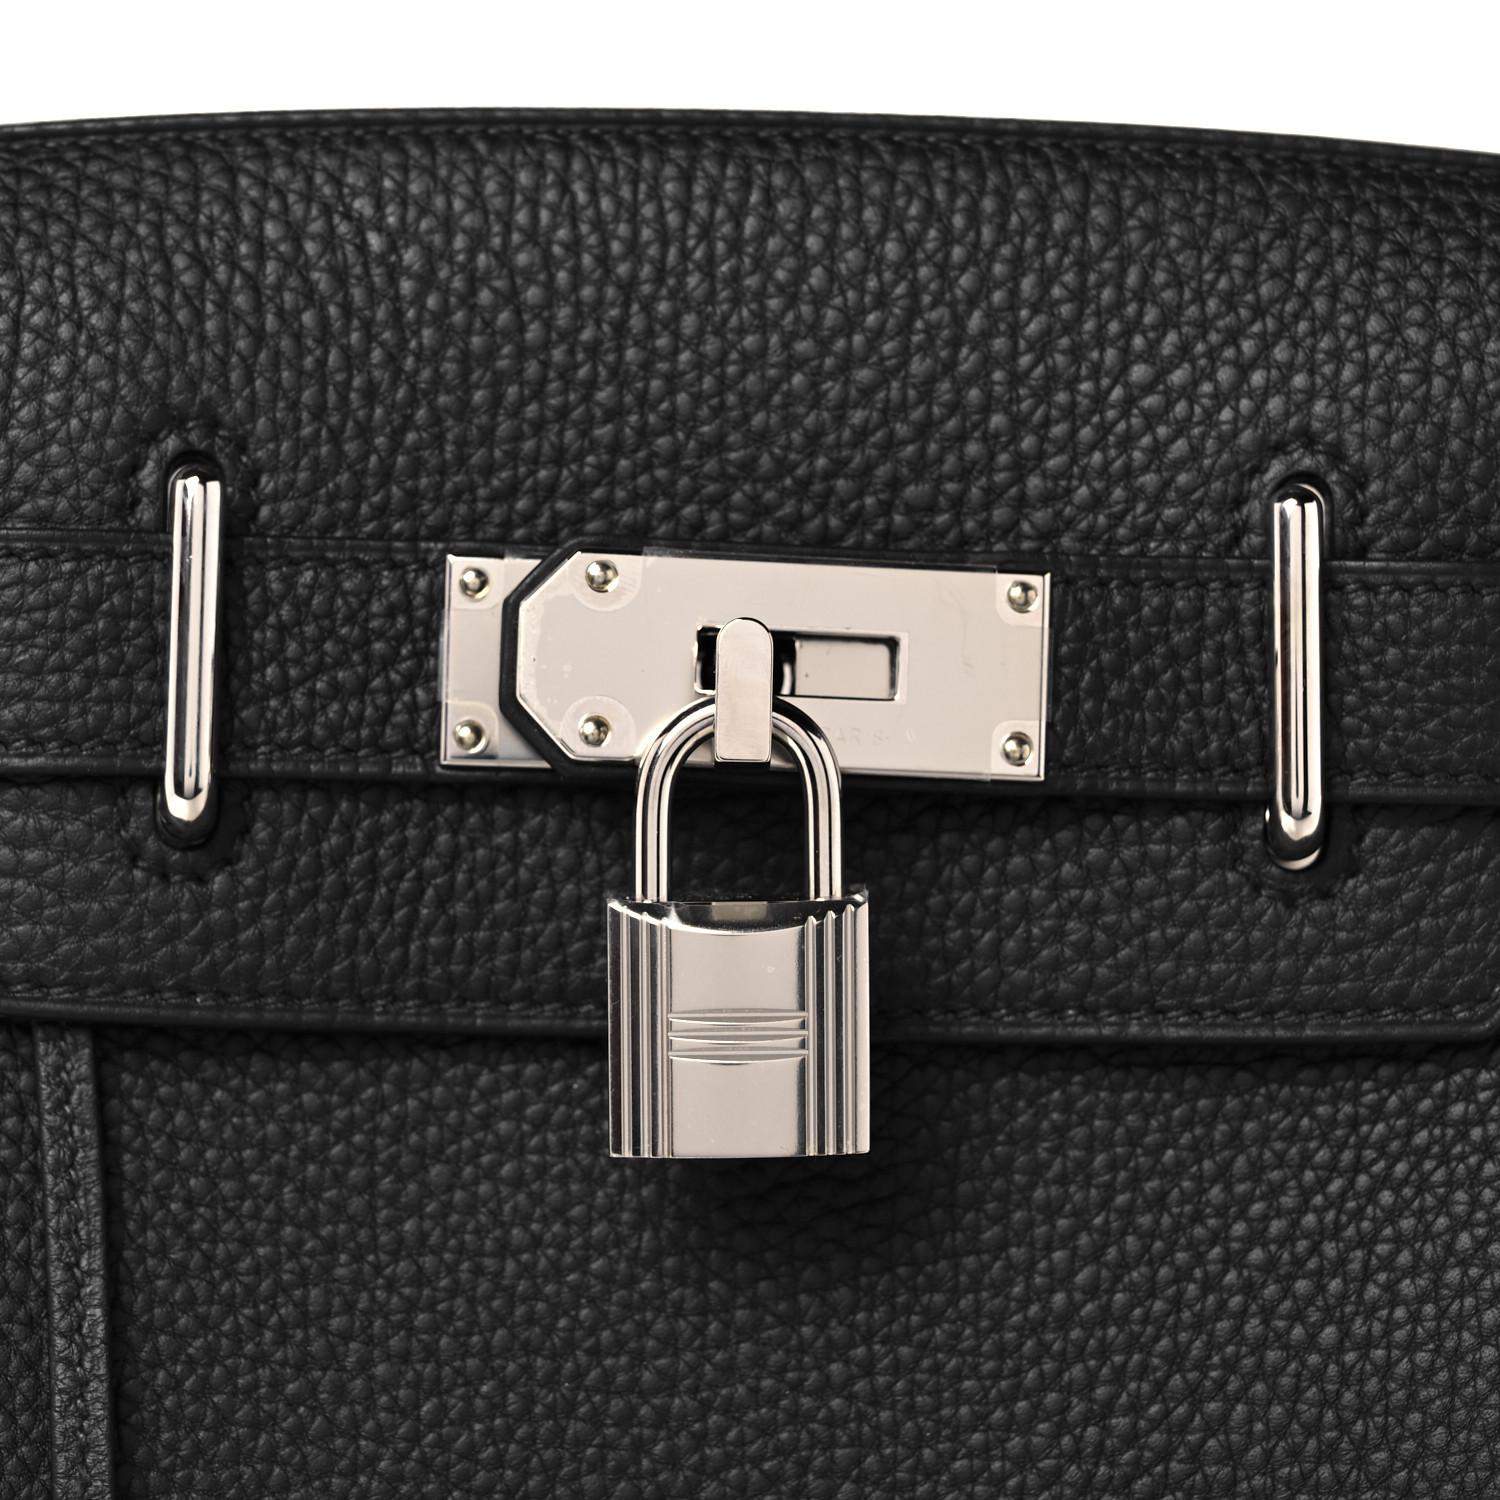 From 2021 Collection
Togo Leather
Palladium Hardware
Measures 3.5